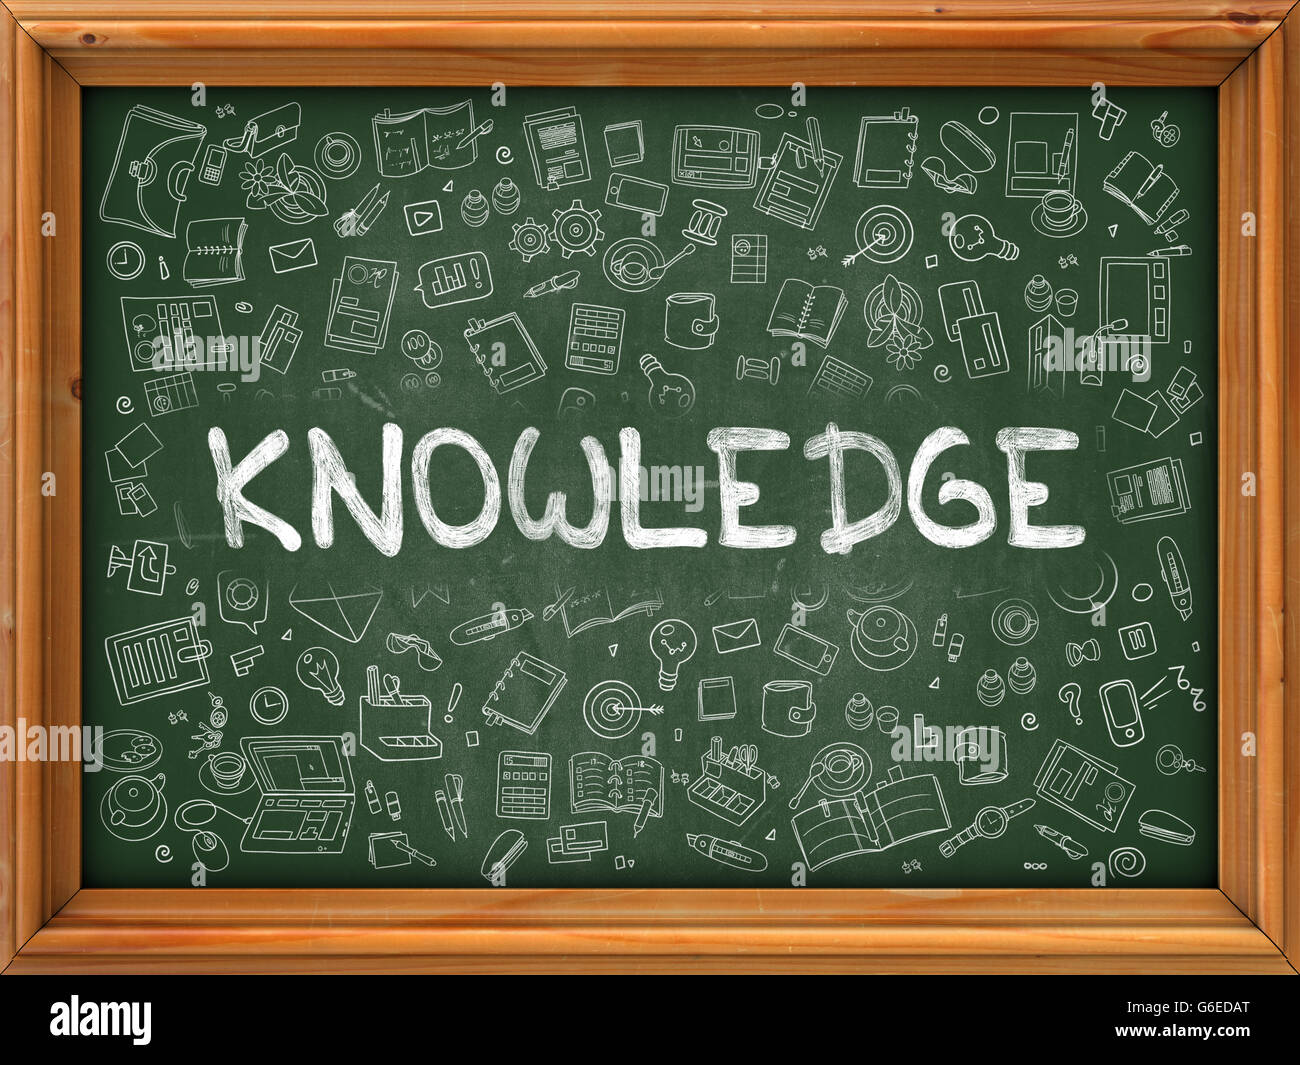 Knowledge Concept. Green Chalkboard with Doodle Icons. Stock Photo